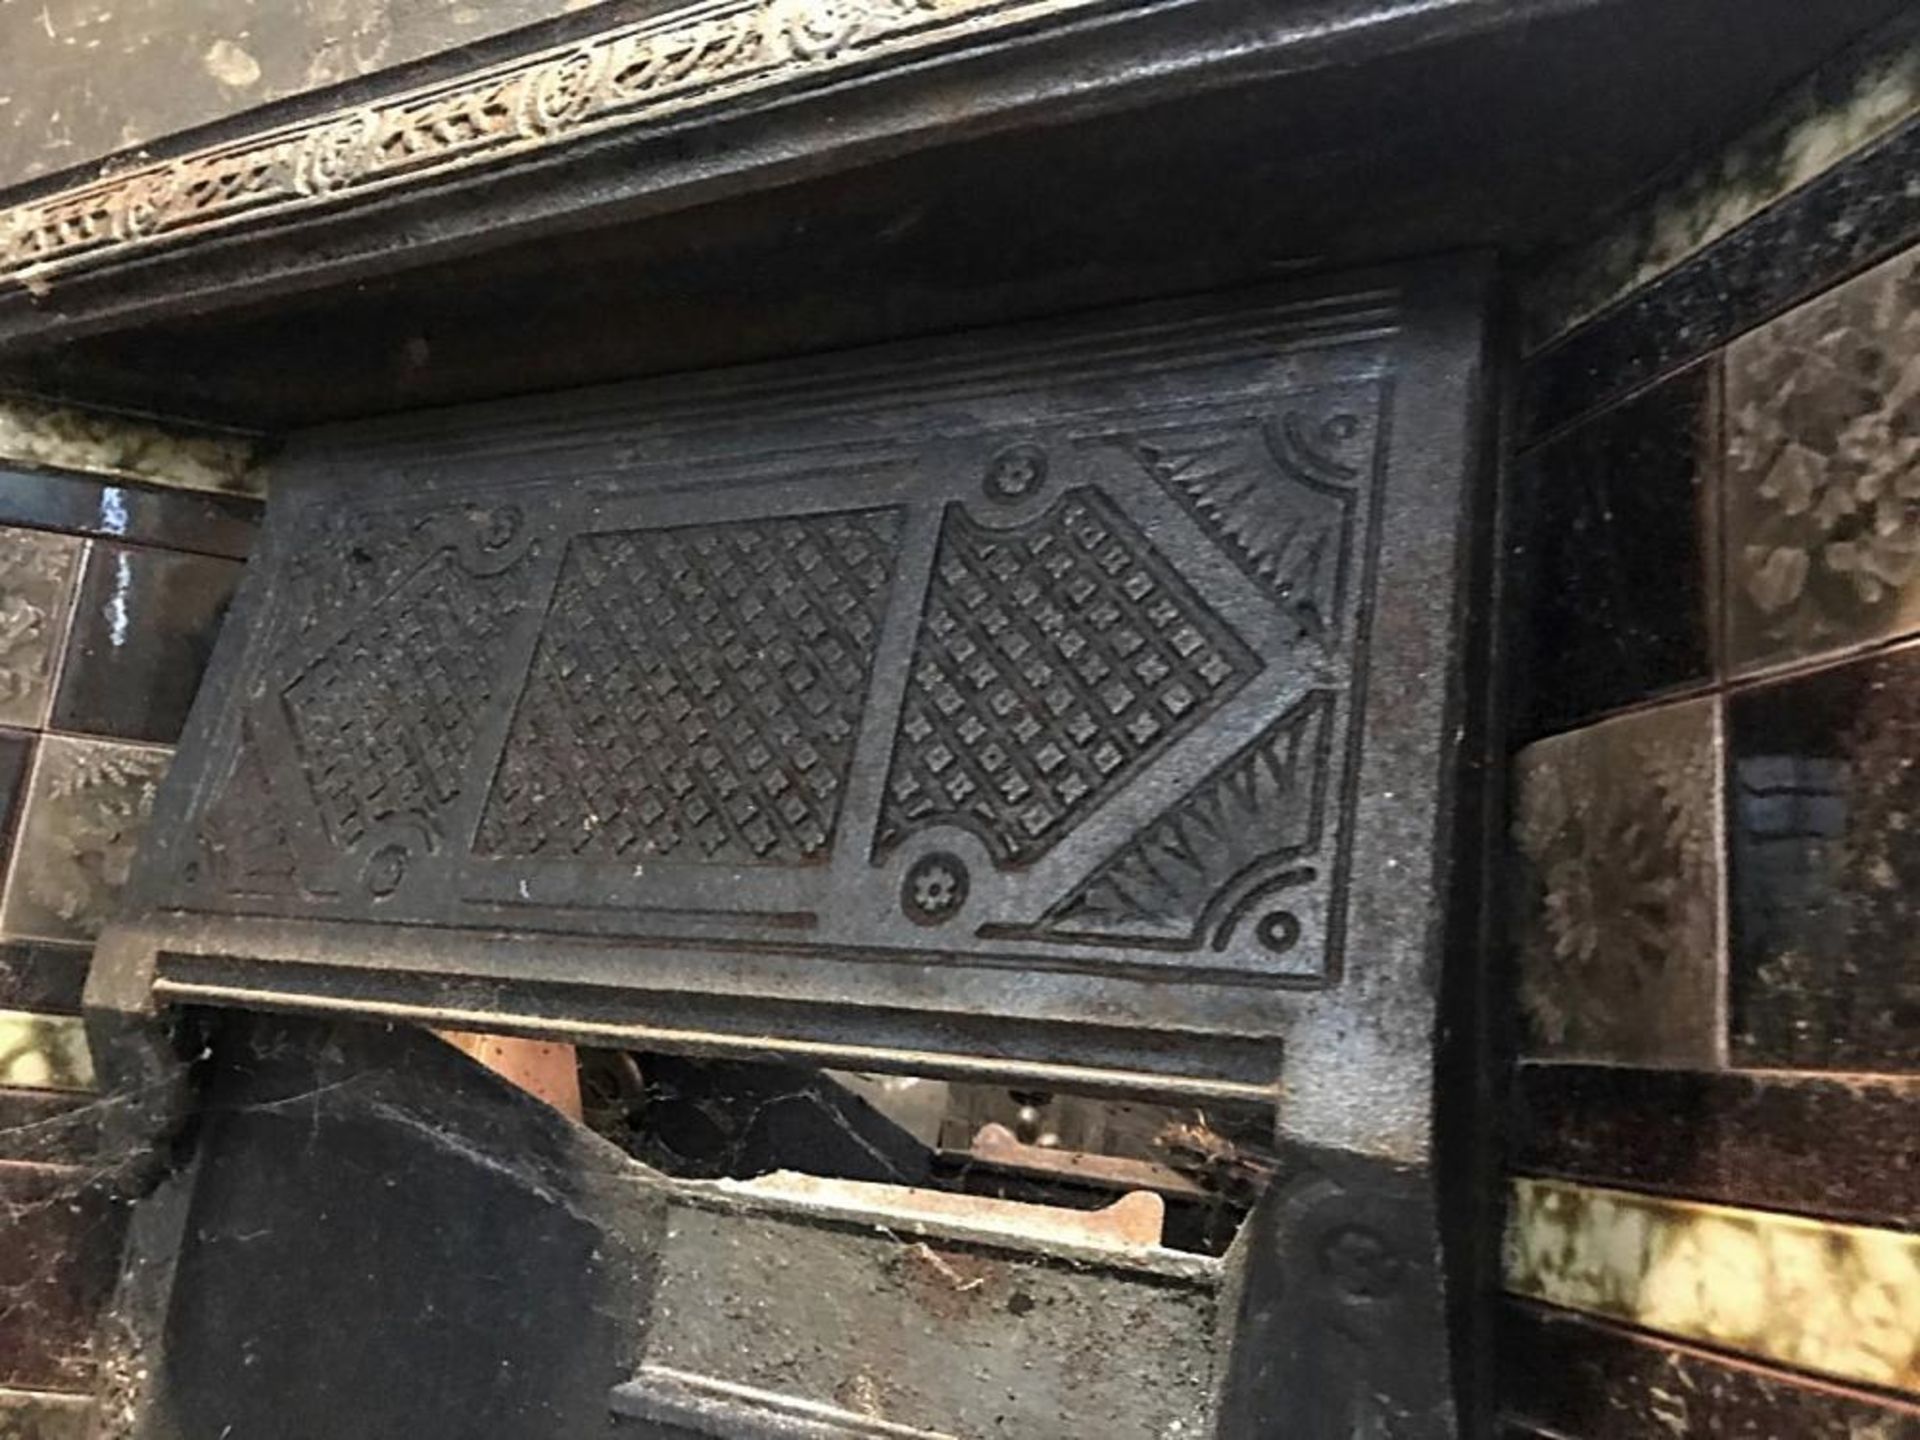 1 x Rare Antique Victorian Cast Iron Fire Insert With Patterned Tiles To Sides - Dimensions: Width 9 - Image 3 of 5